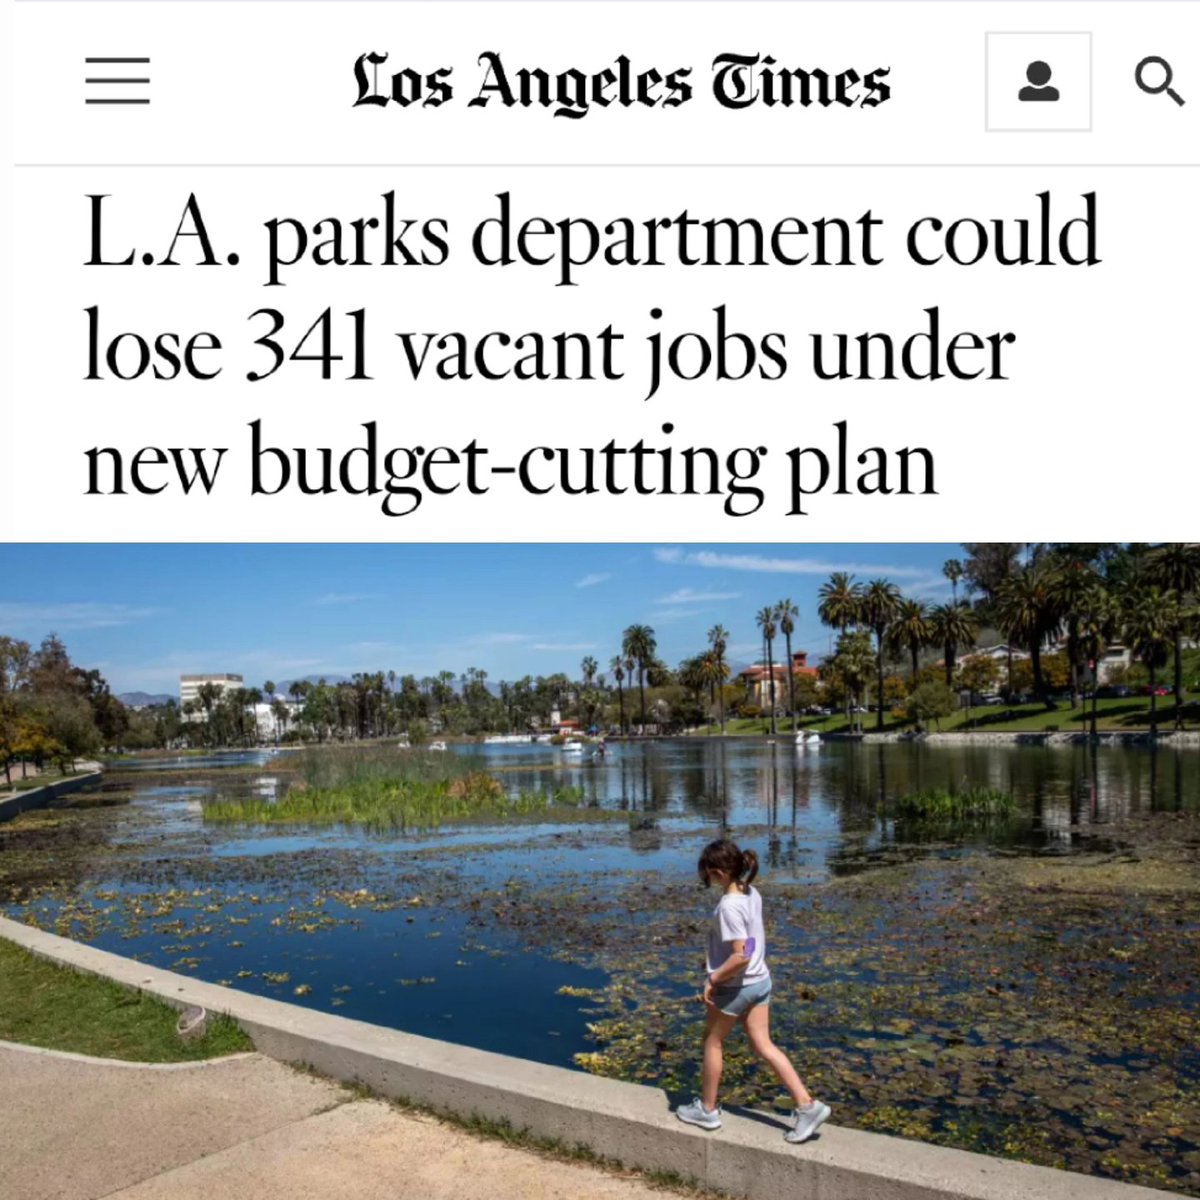 “If you chop off 20% of a Lexus, you don’t get a Camry, you get a wreck” The City is proposing to eliminate 1,974 job positions amidst a staffing shortage across all city departments to save 💰 to pay for overspending in police, liability claims, & more. latimes.com/california/sto…